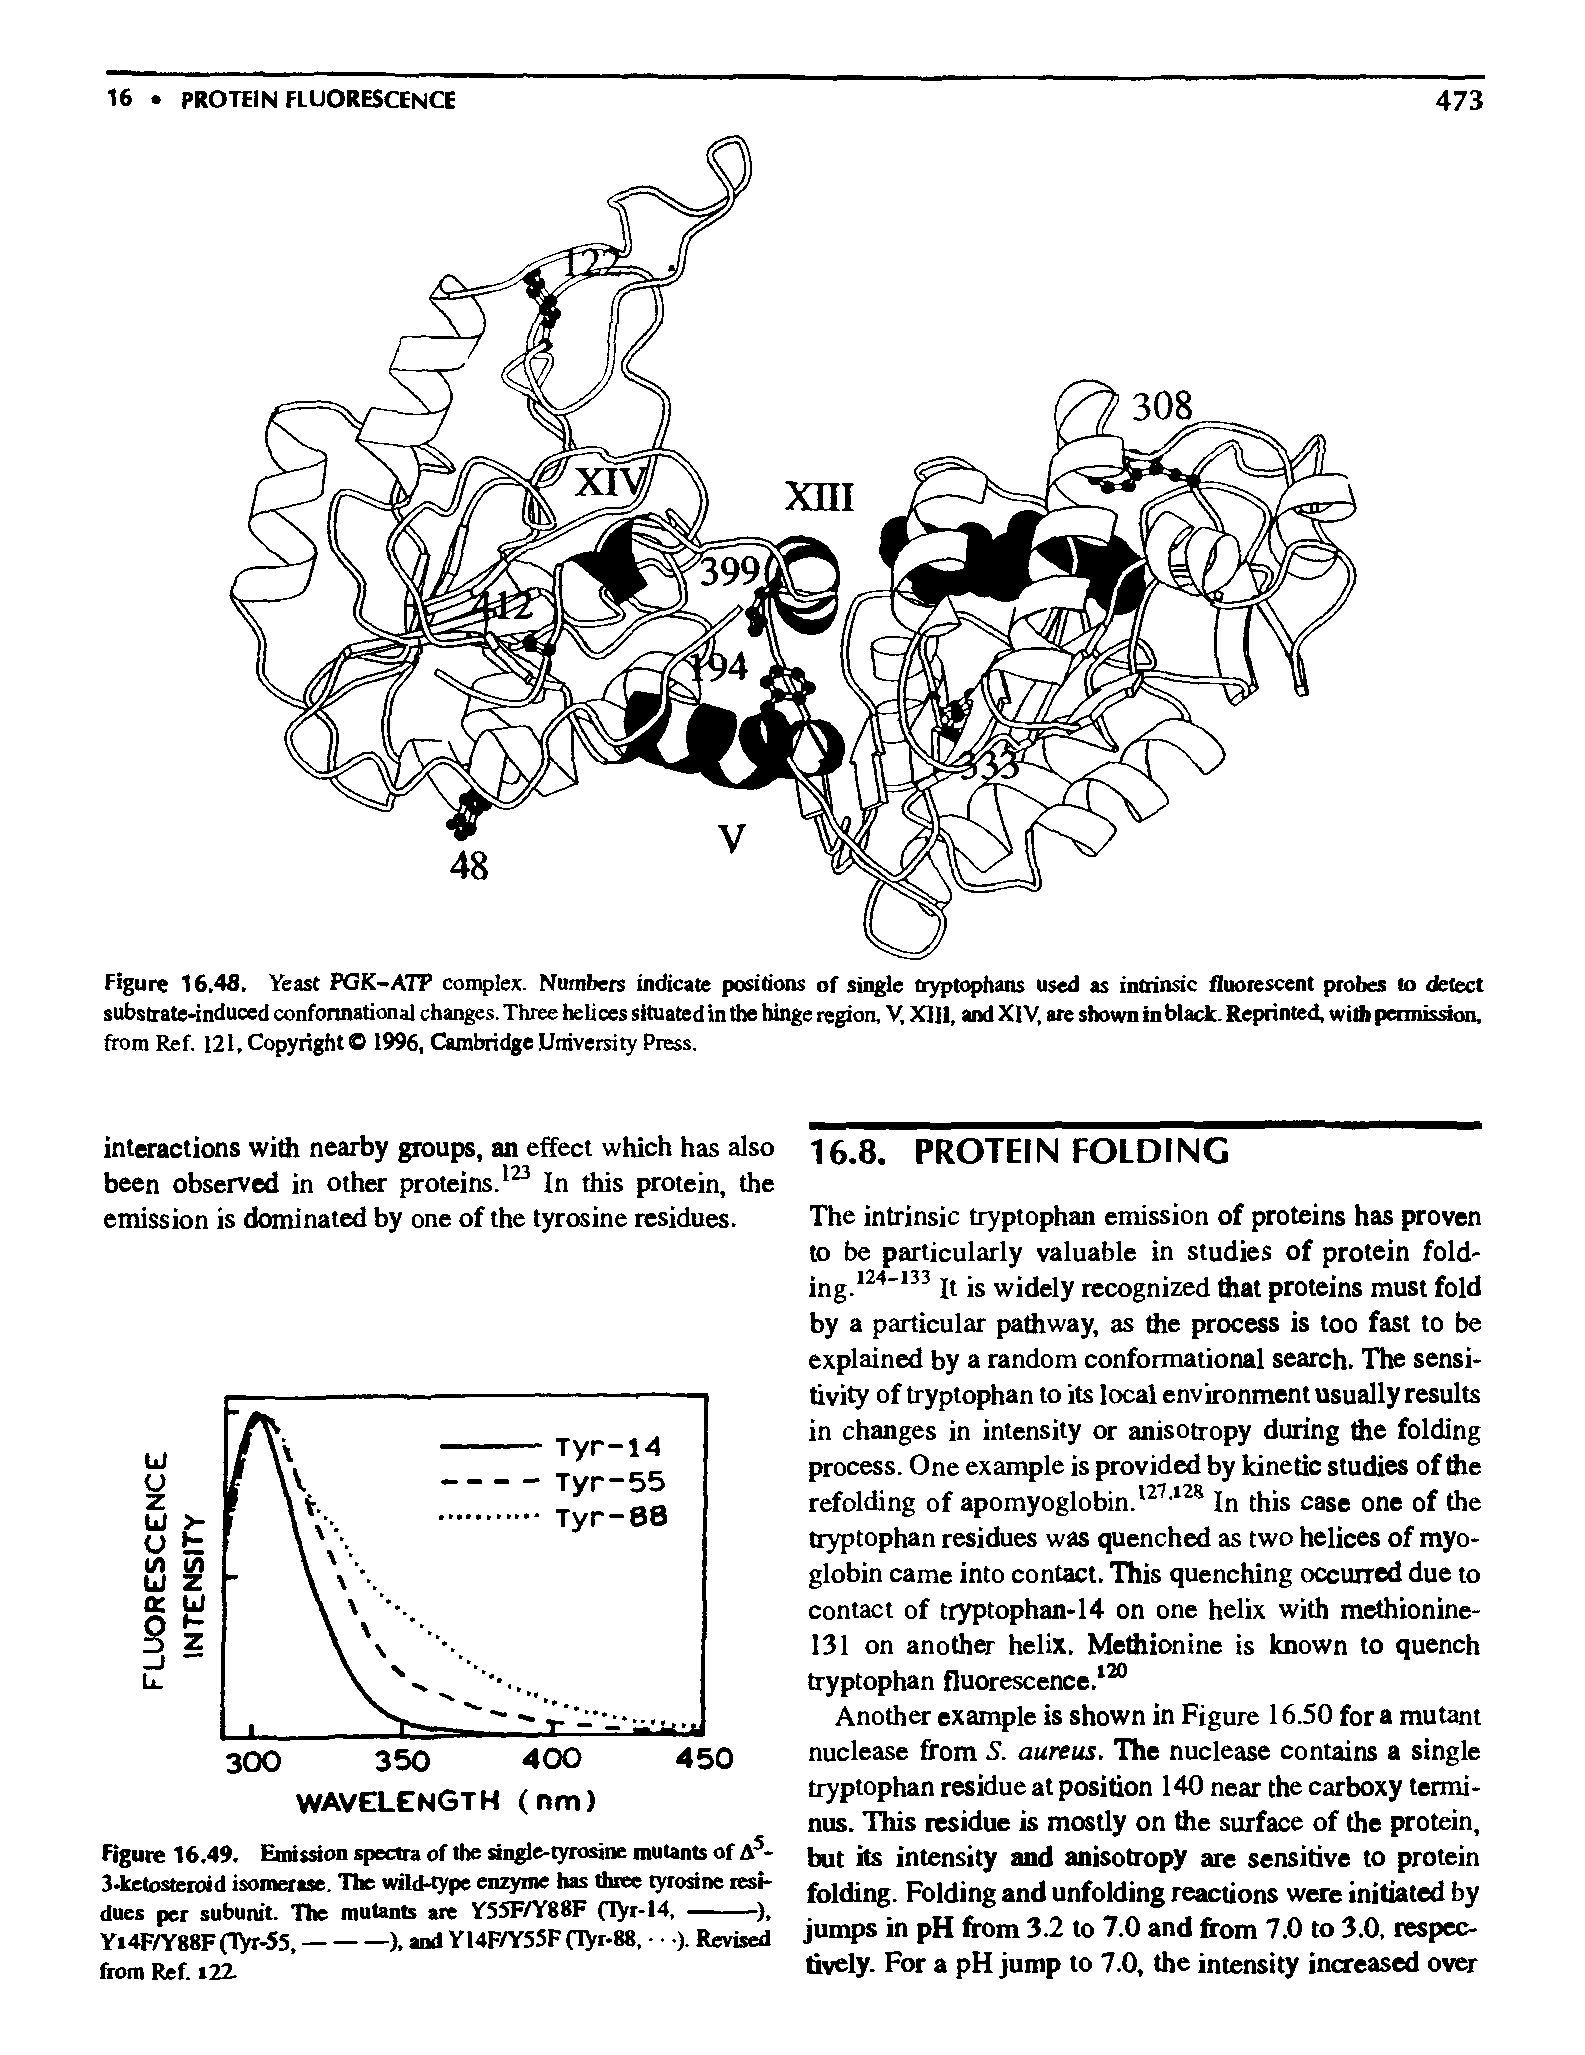 Figure 16.46, Yeast PGK-ATF complex. Numbers indicate positions of sing tiyplt lians used as intrinsic fluoiescent pfobes lo delect substrate-induced conformational changes. Three helices situated In the hinge region, V. X]]l, and Xi V, are riiowninblaclc. Reprinted, wiApennissioii. ftom Ref. 121, Copyright O 1996, Cambridge University Press.